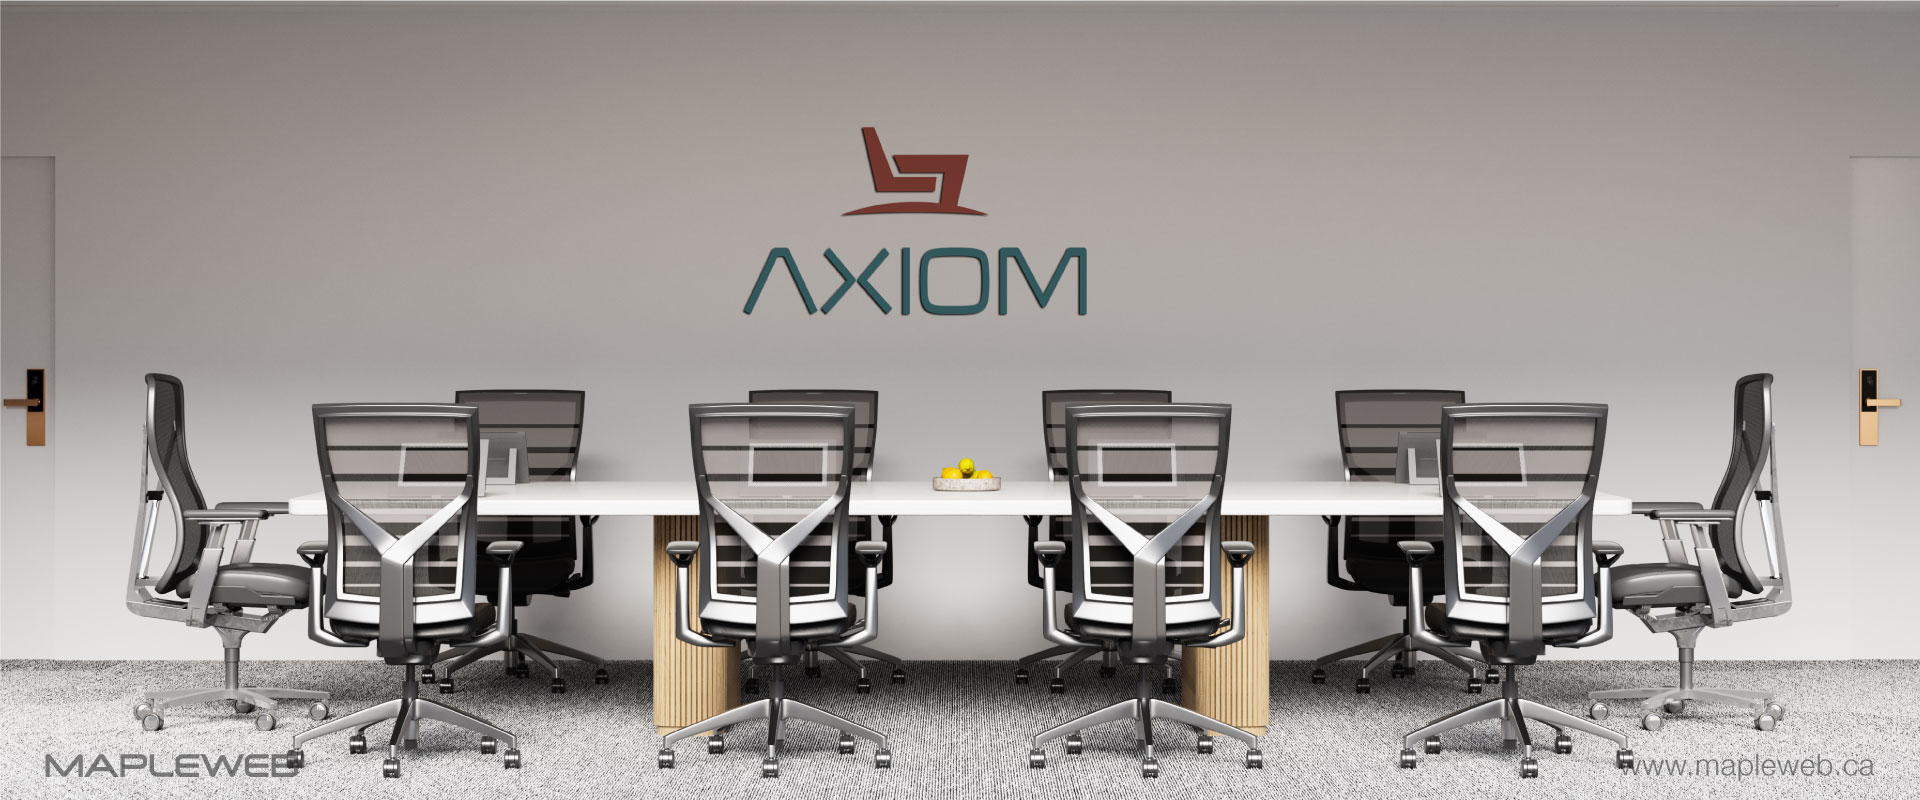 axiom-office furniture-brand-logo-design-by-mapleweb-vancouver-canada-wall-mock